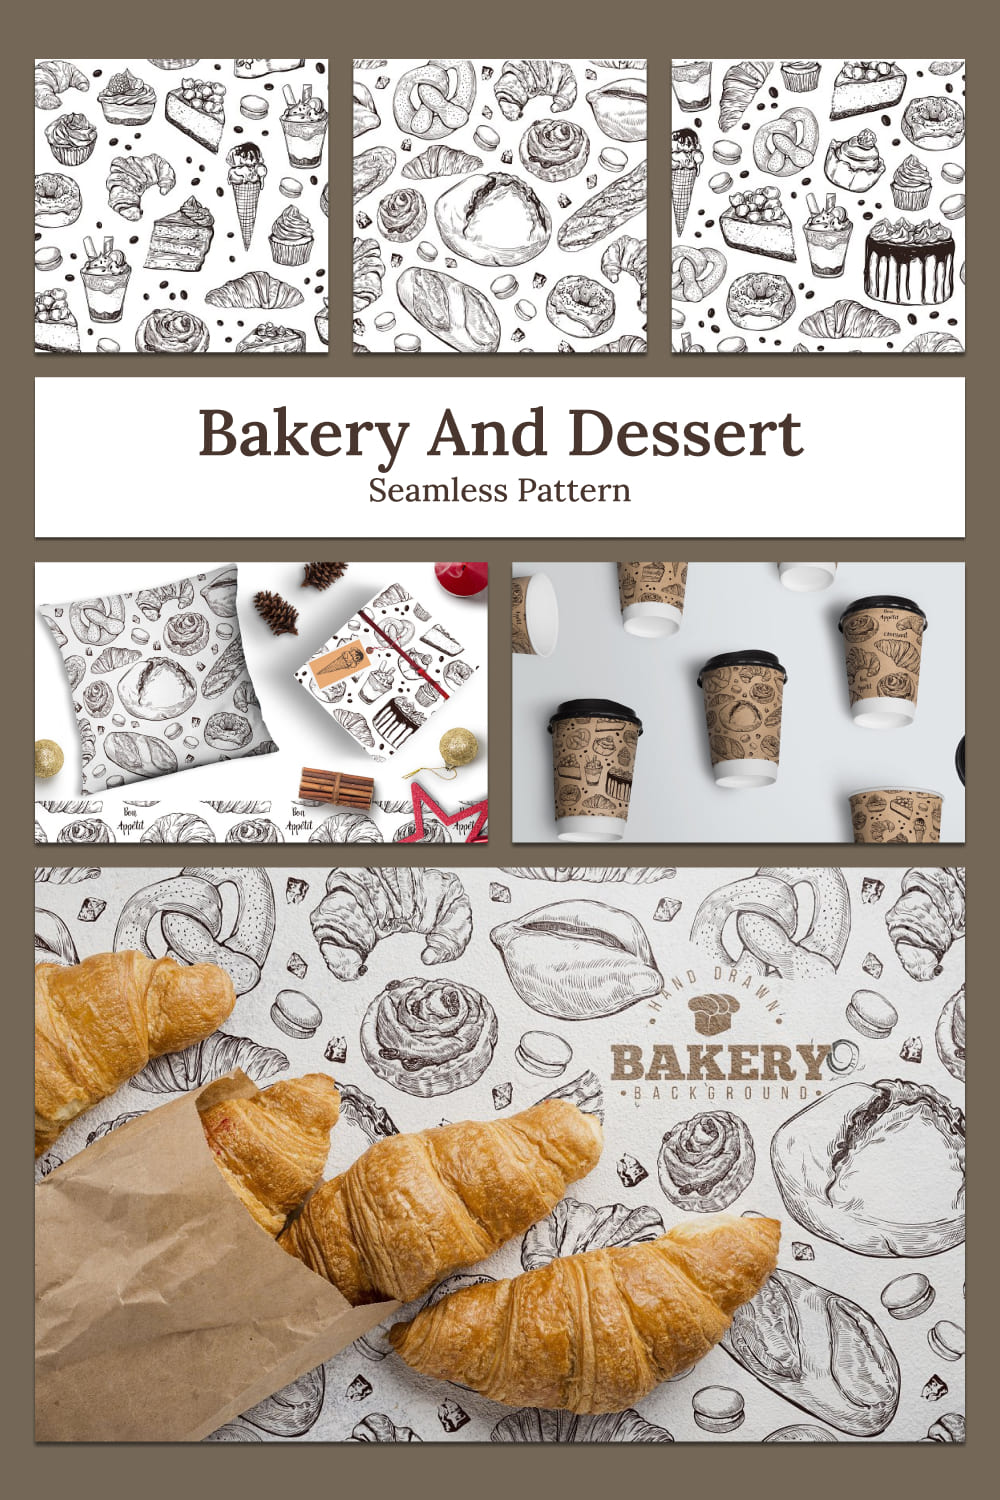 Bakery and dessert seamless pattern - pinterest image preview.